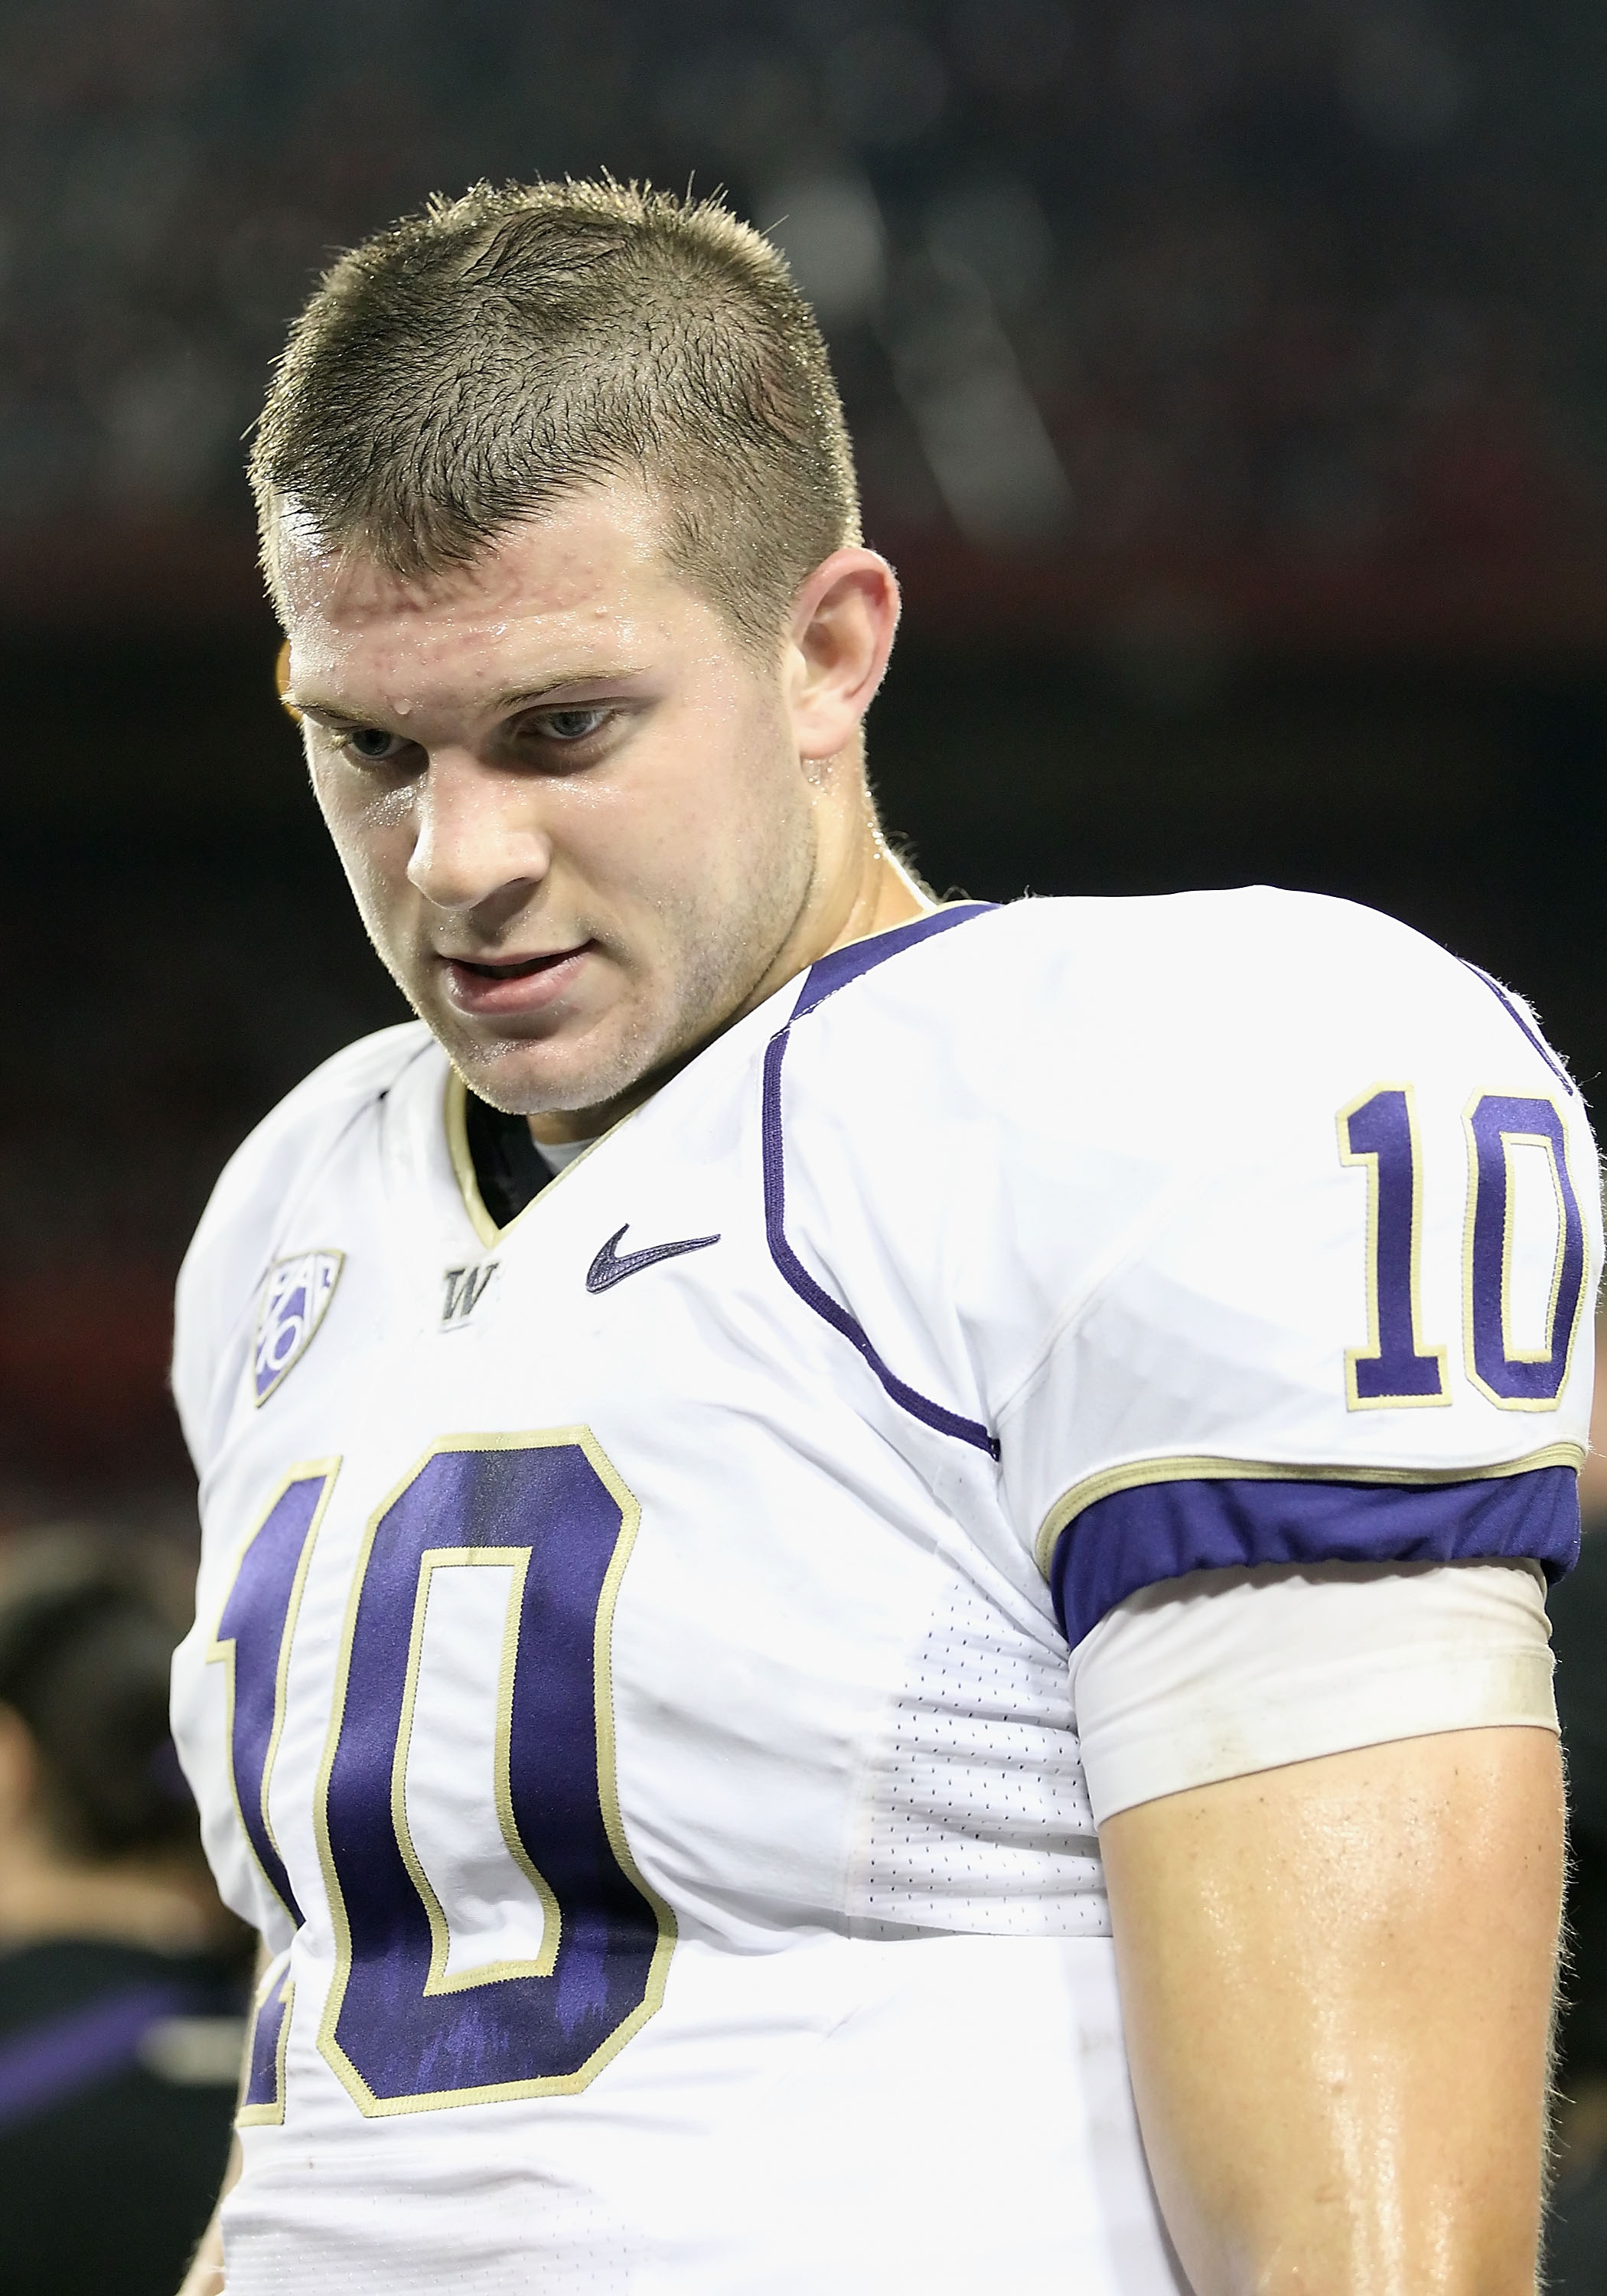 Washington QB Jake Locker is the man with the golden arm and feet